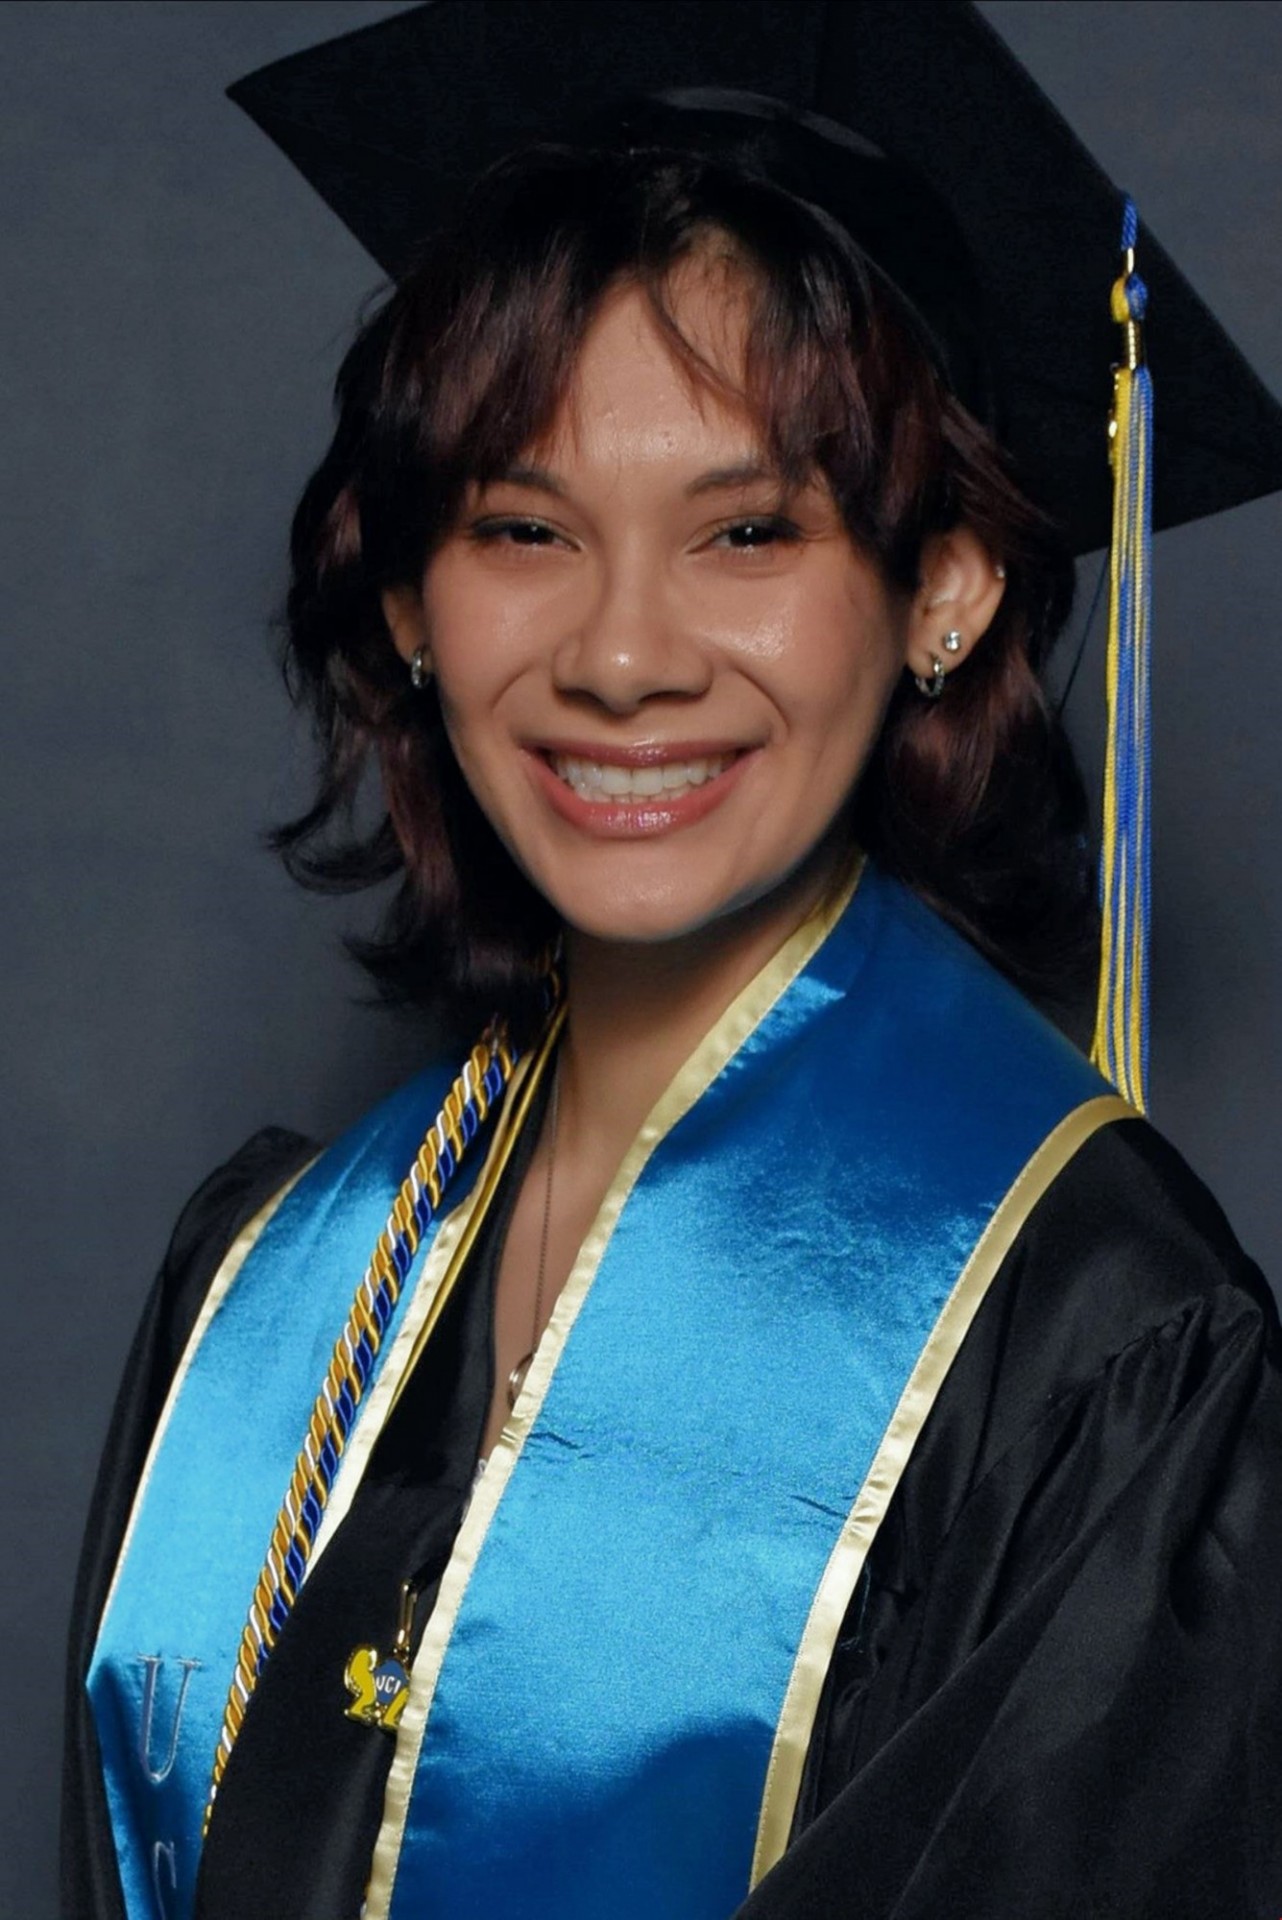 Portrait of Emily Barragan, a young woman with brown hair wearing black cap and gown with blue and gold regalia on a grey background